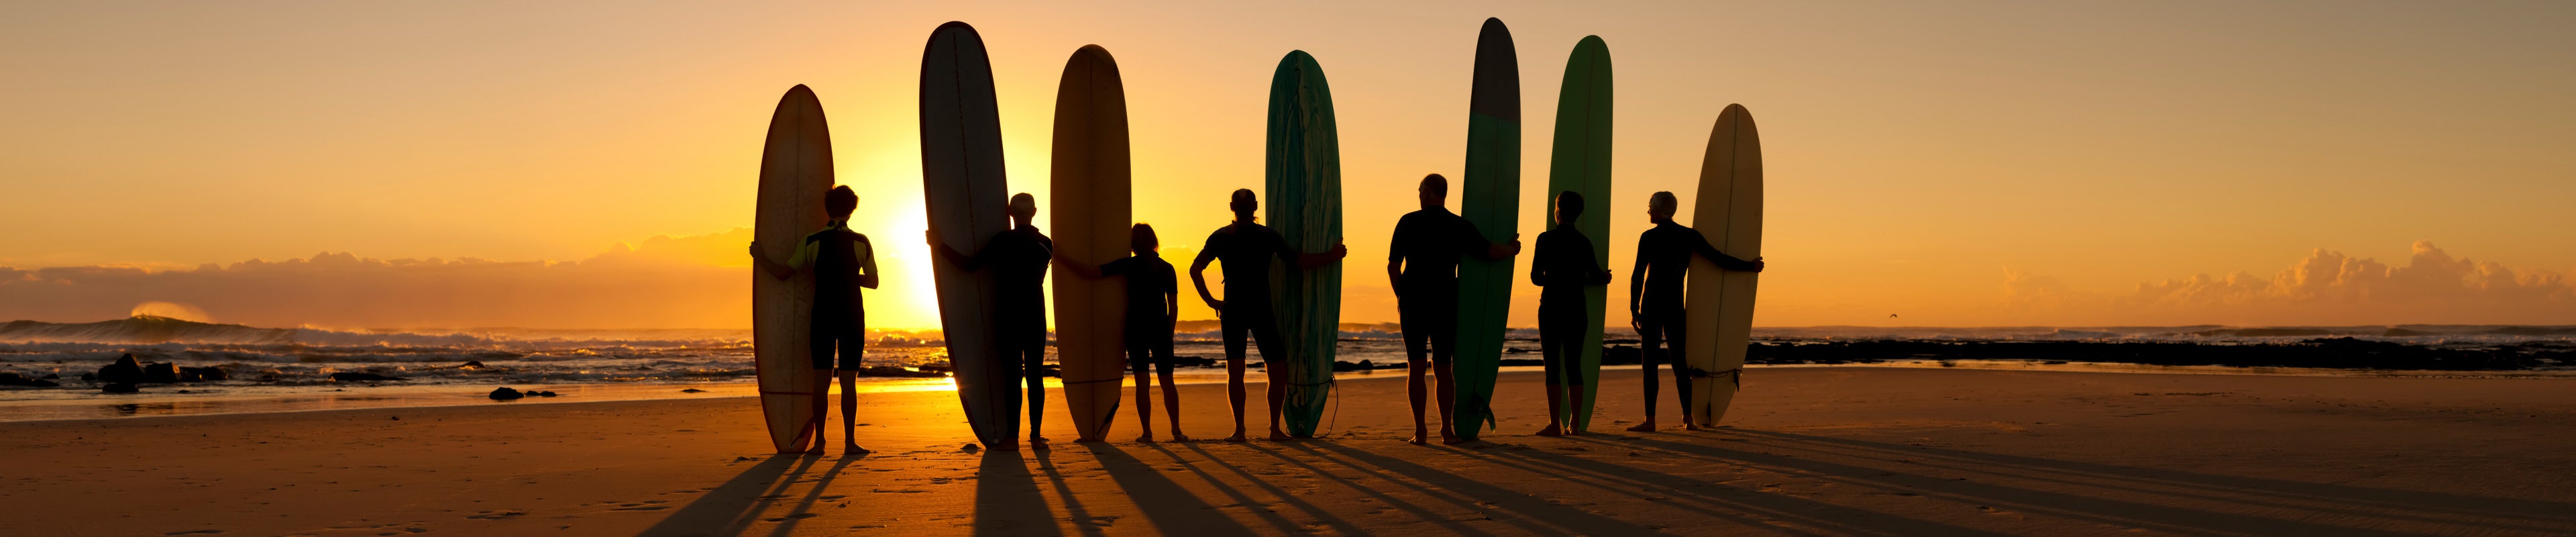 Surfers on beach at sunset iStock 171252100 crop 3840x800 94472207 7060 40a9 a4ef c5b518c1b52d